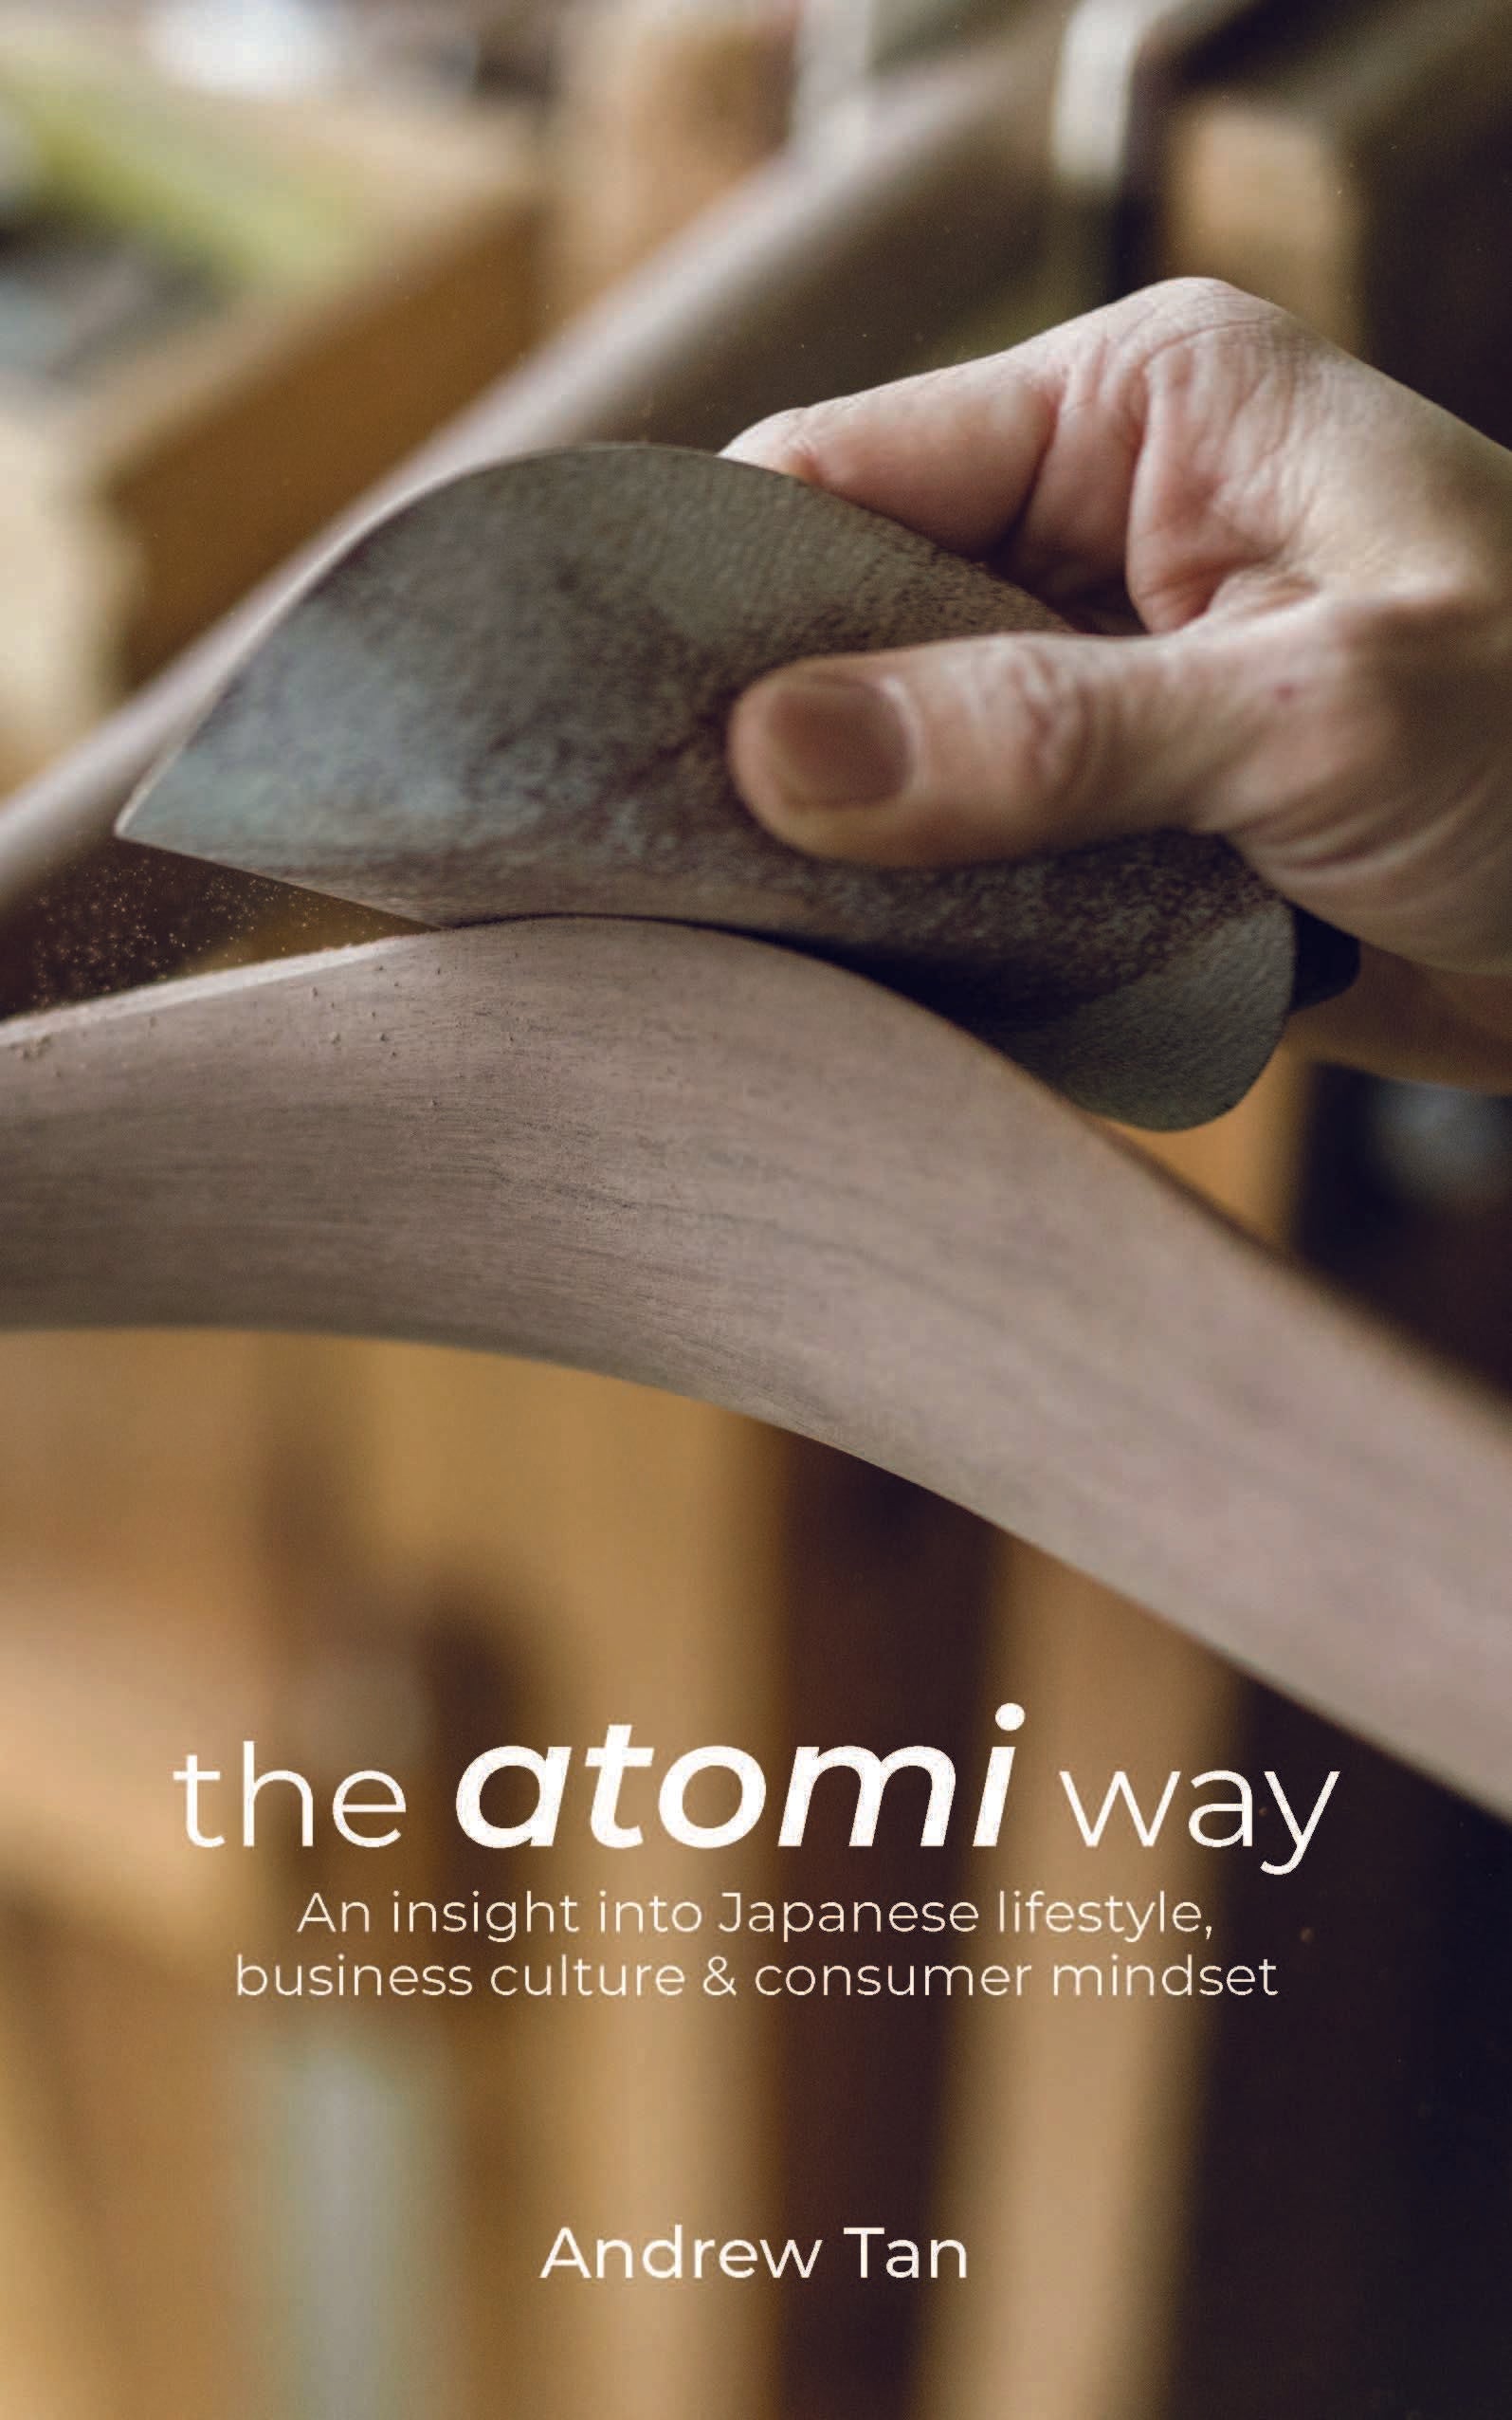 The Atomi Way: An Insight Into Japanese Lifestyle, Business Culture & Consumer Mindset